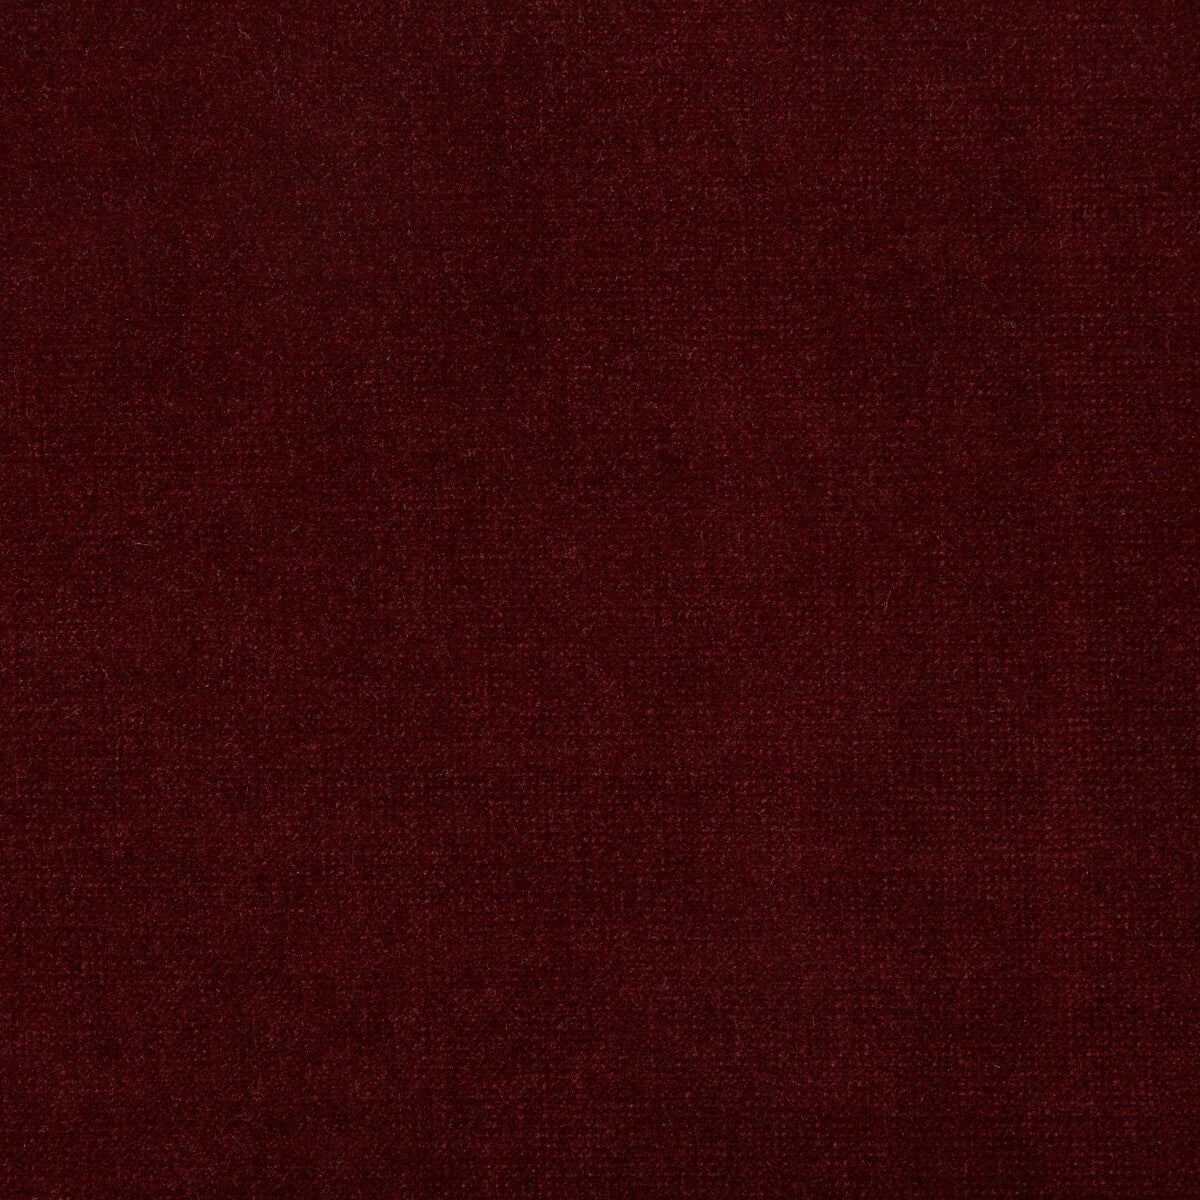 Chessford fabric in maroon color - pattern 35360.9.0 - by Kravet Smart in the Performance collection